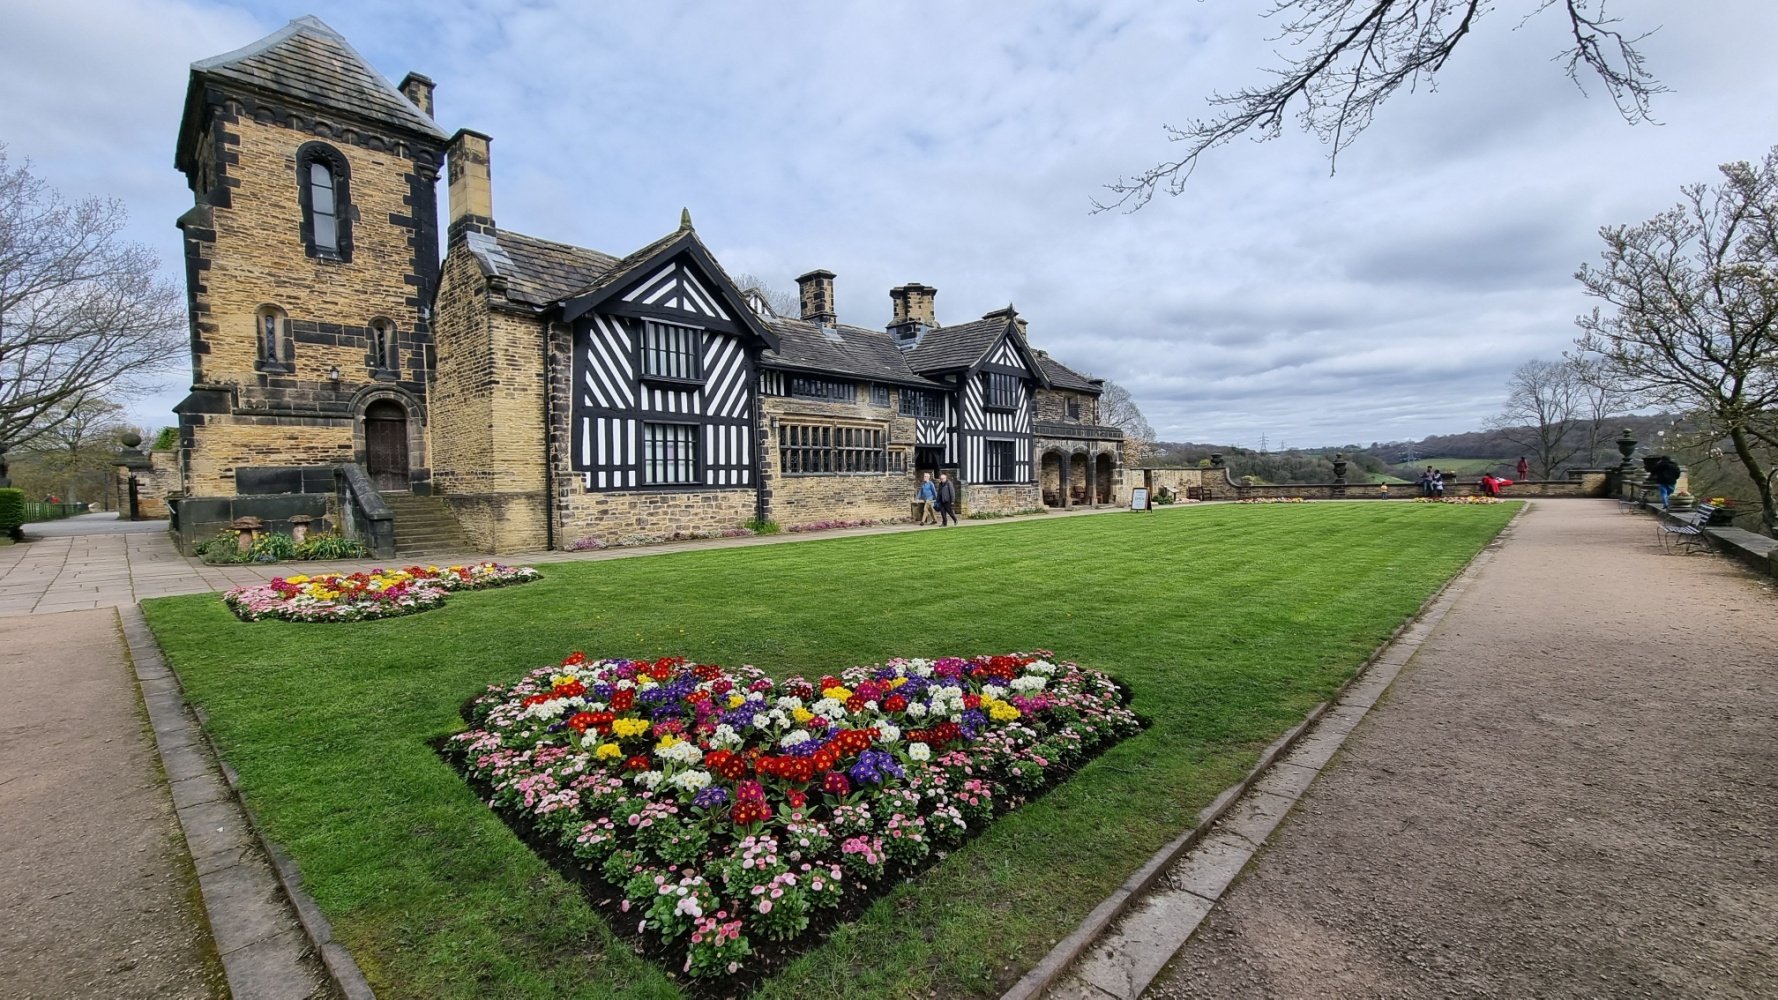 Image name shibden hall halifax west yorkshire the 19 image from the post A look at the history of Shibden Hall, with Dr Emma Wells in Yorkshire.com.